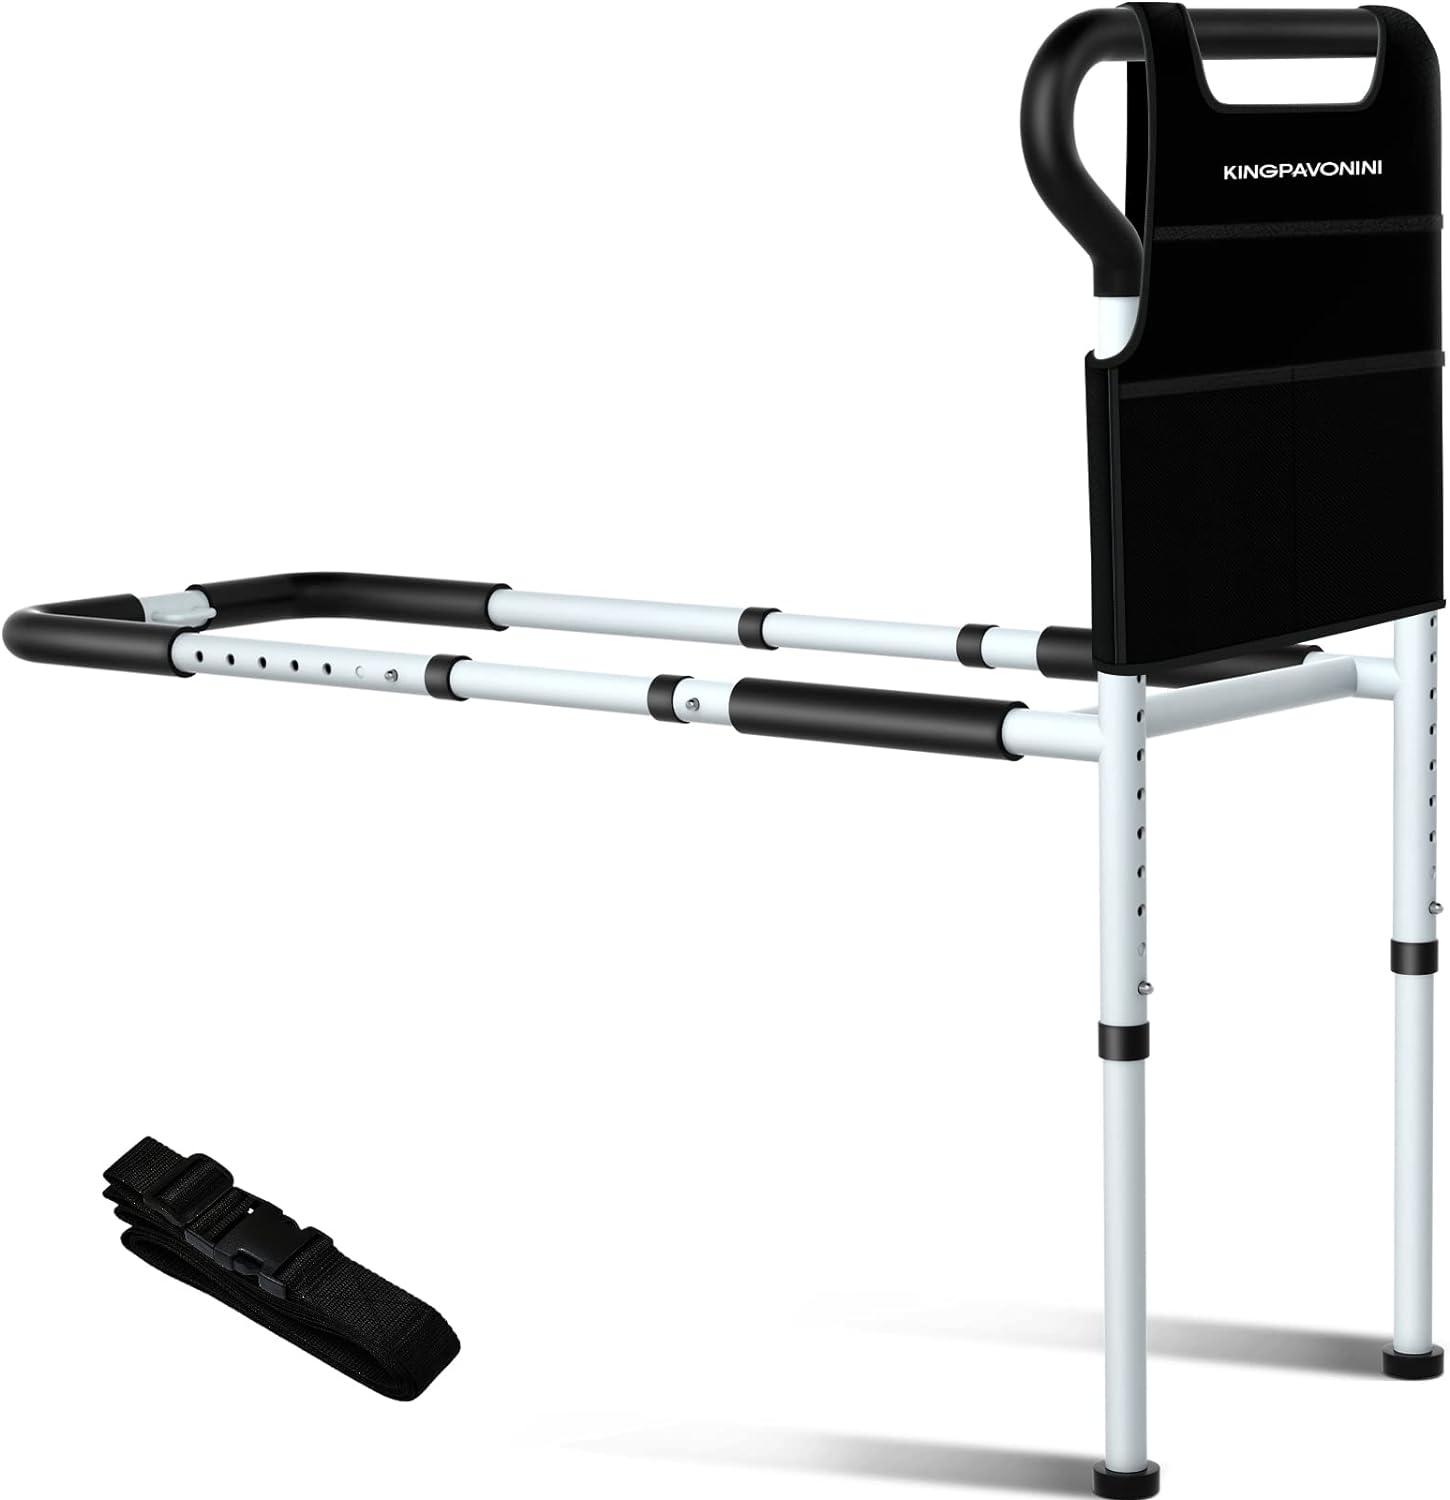 KingPavonini Bed Rails for Elderly Adults Safety - Adjustable Bed Cane with Non-Slip Ergonomic Handle